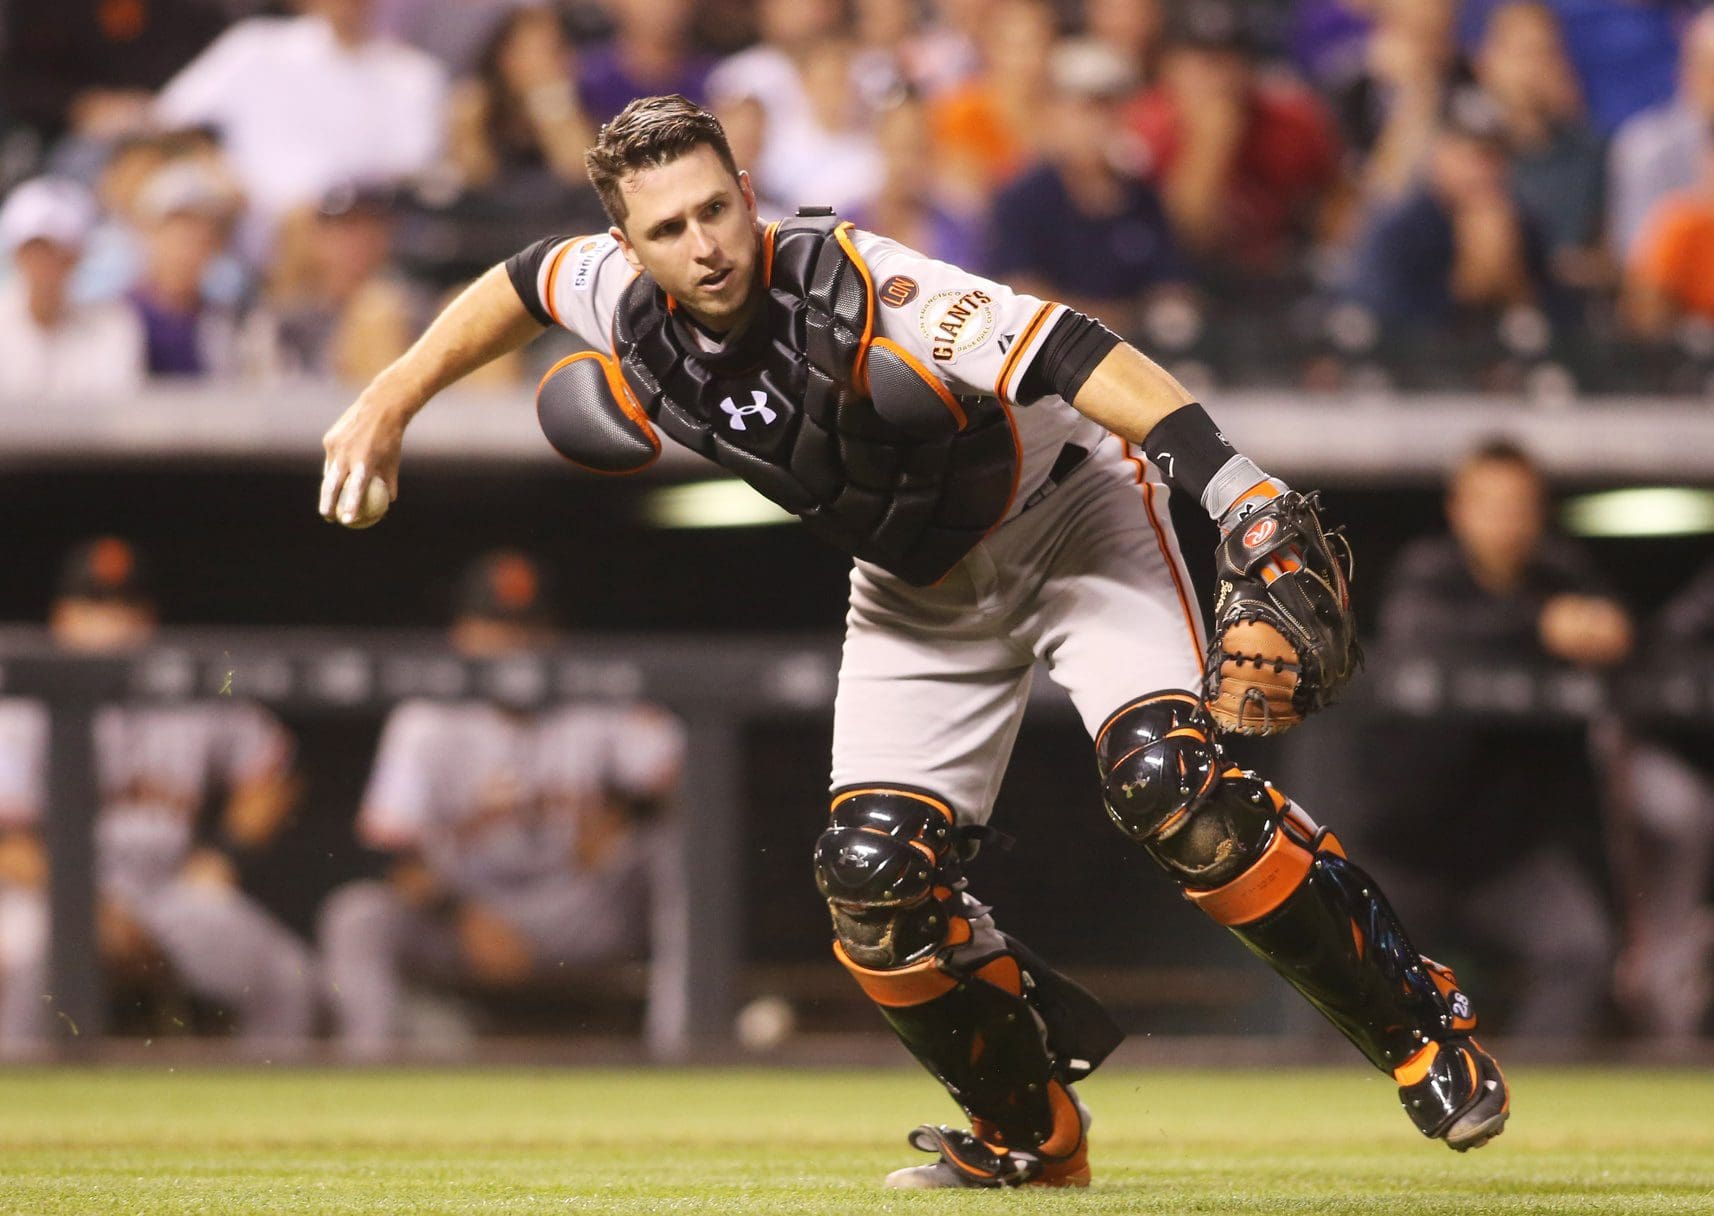 Buster Posey. 